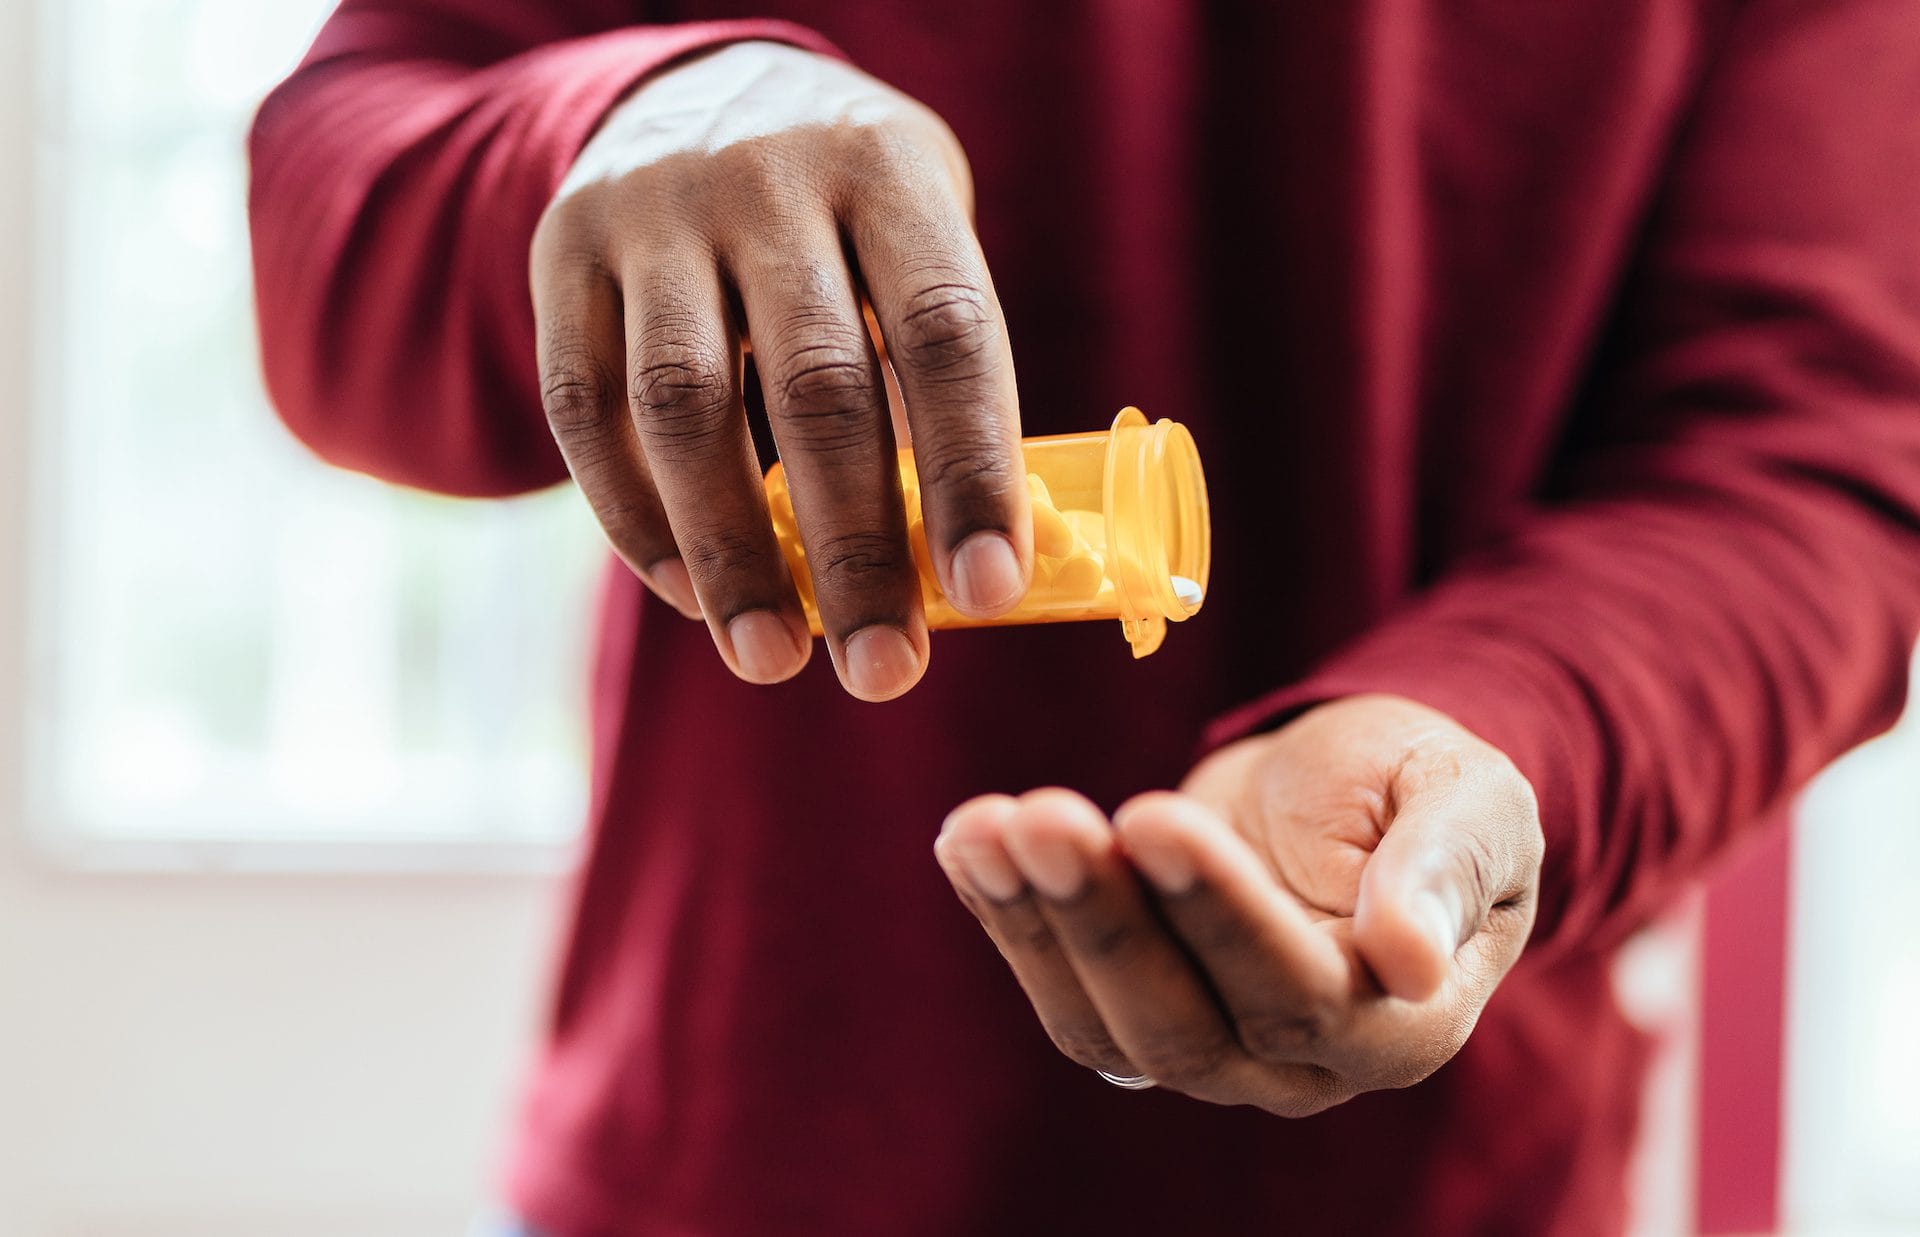 Man in red shirt pouring pills from prescription pill bottle